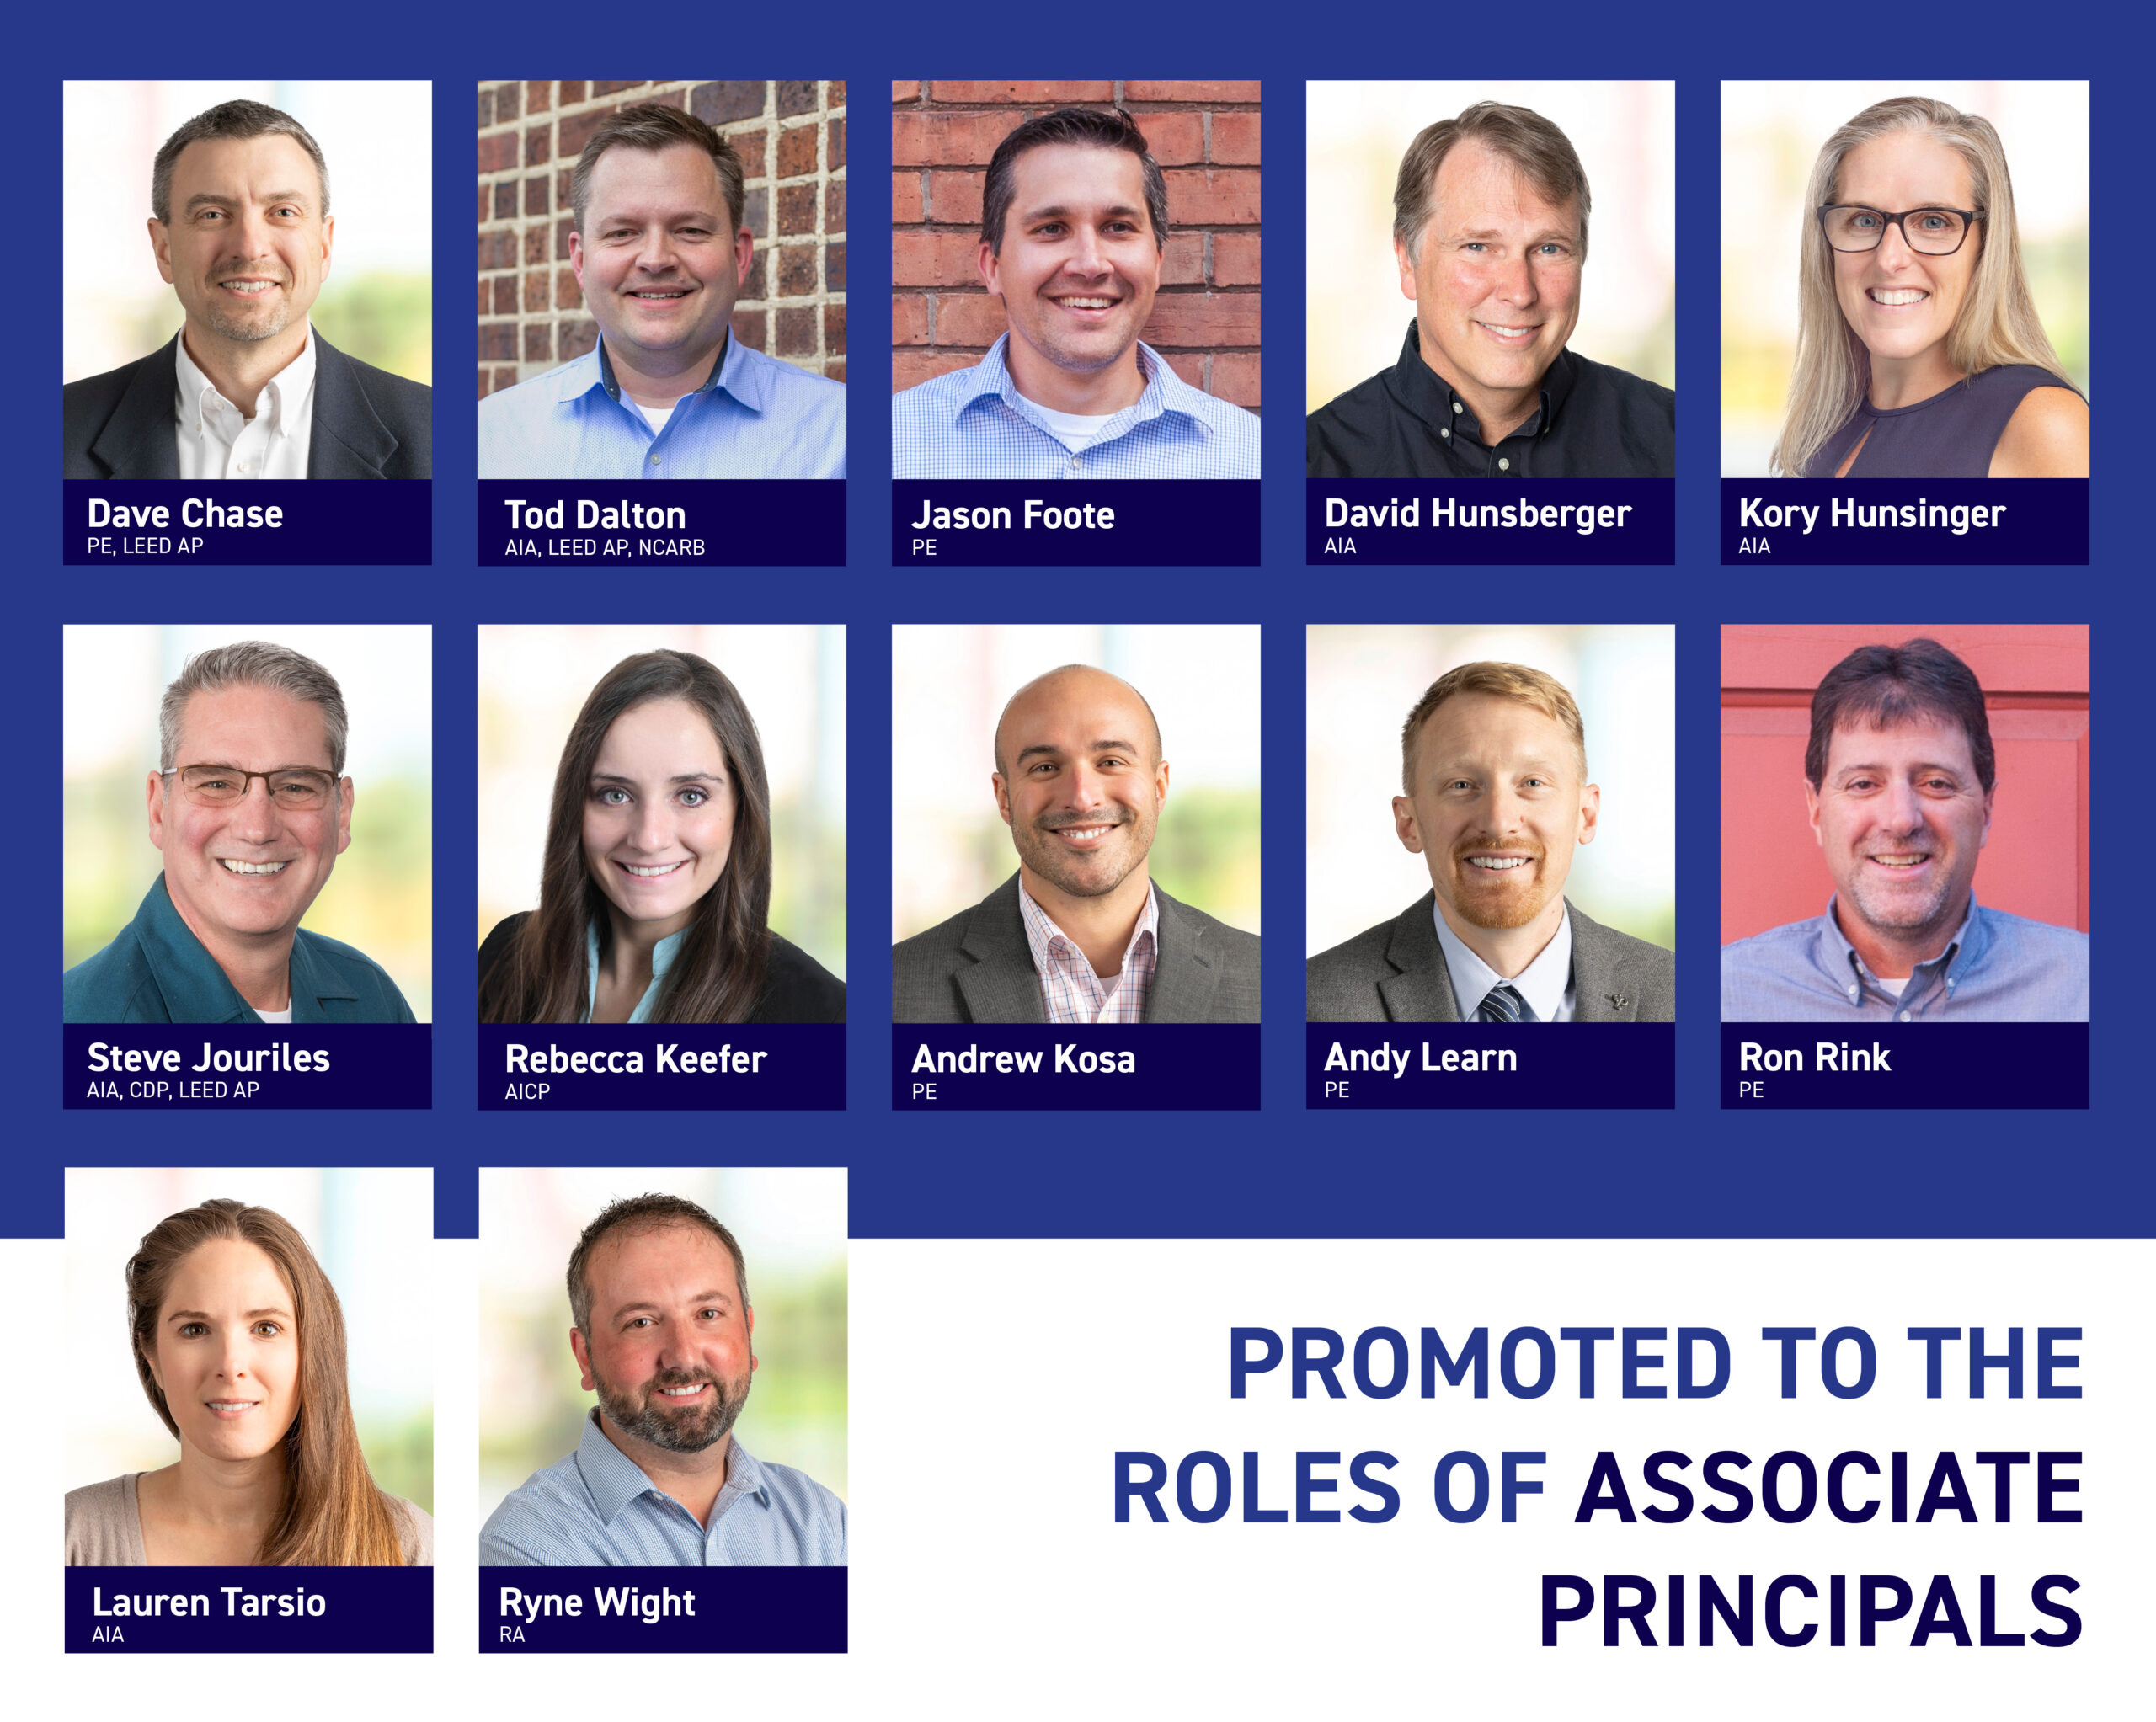 Image shows 12 headshots with names and titles below. On the right bottom side it reads "Promoted to the roles of Associate Principals"